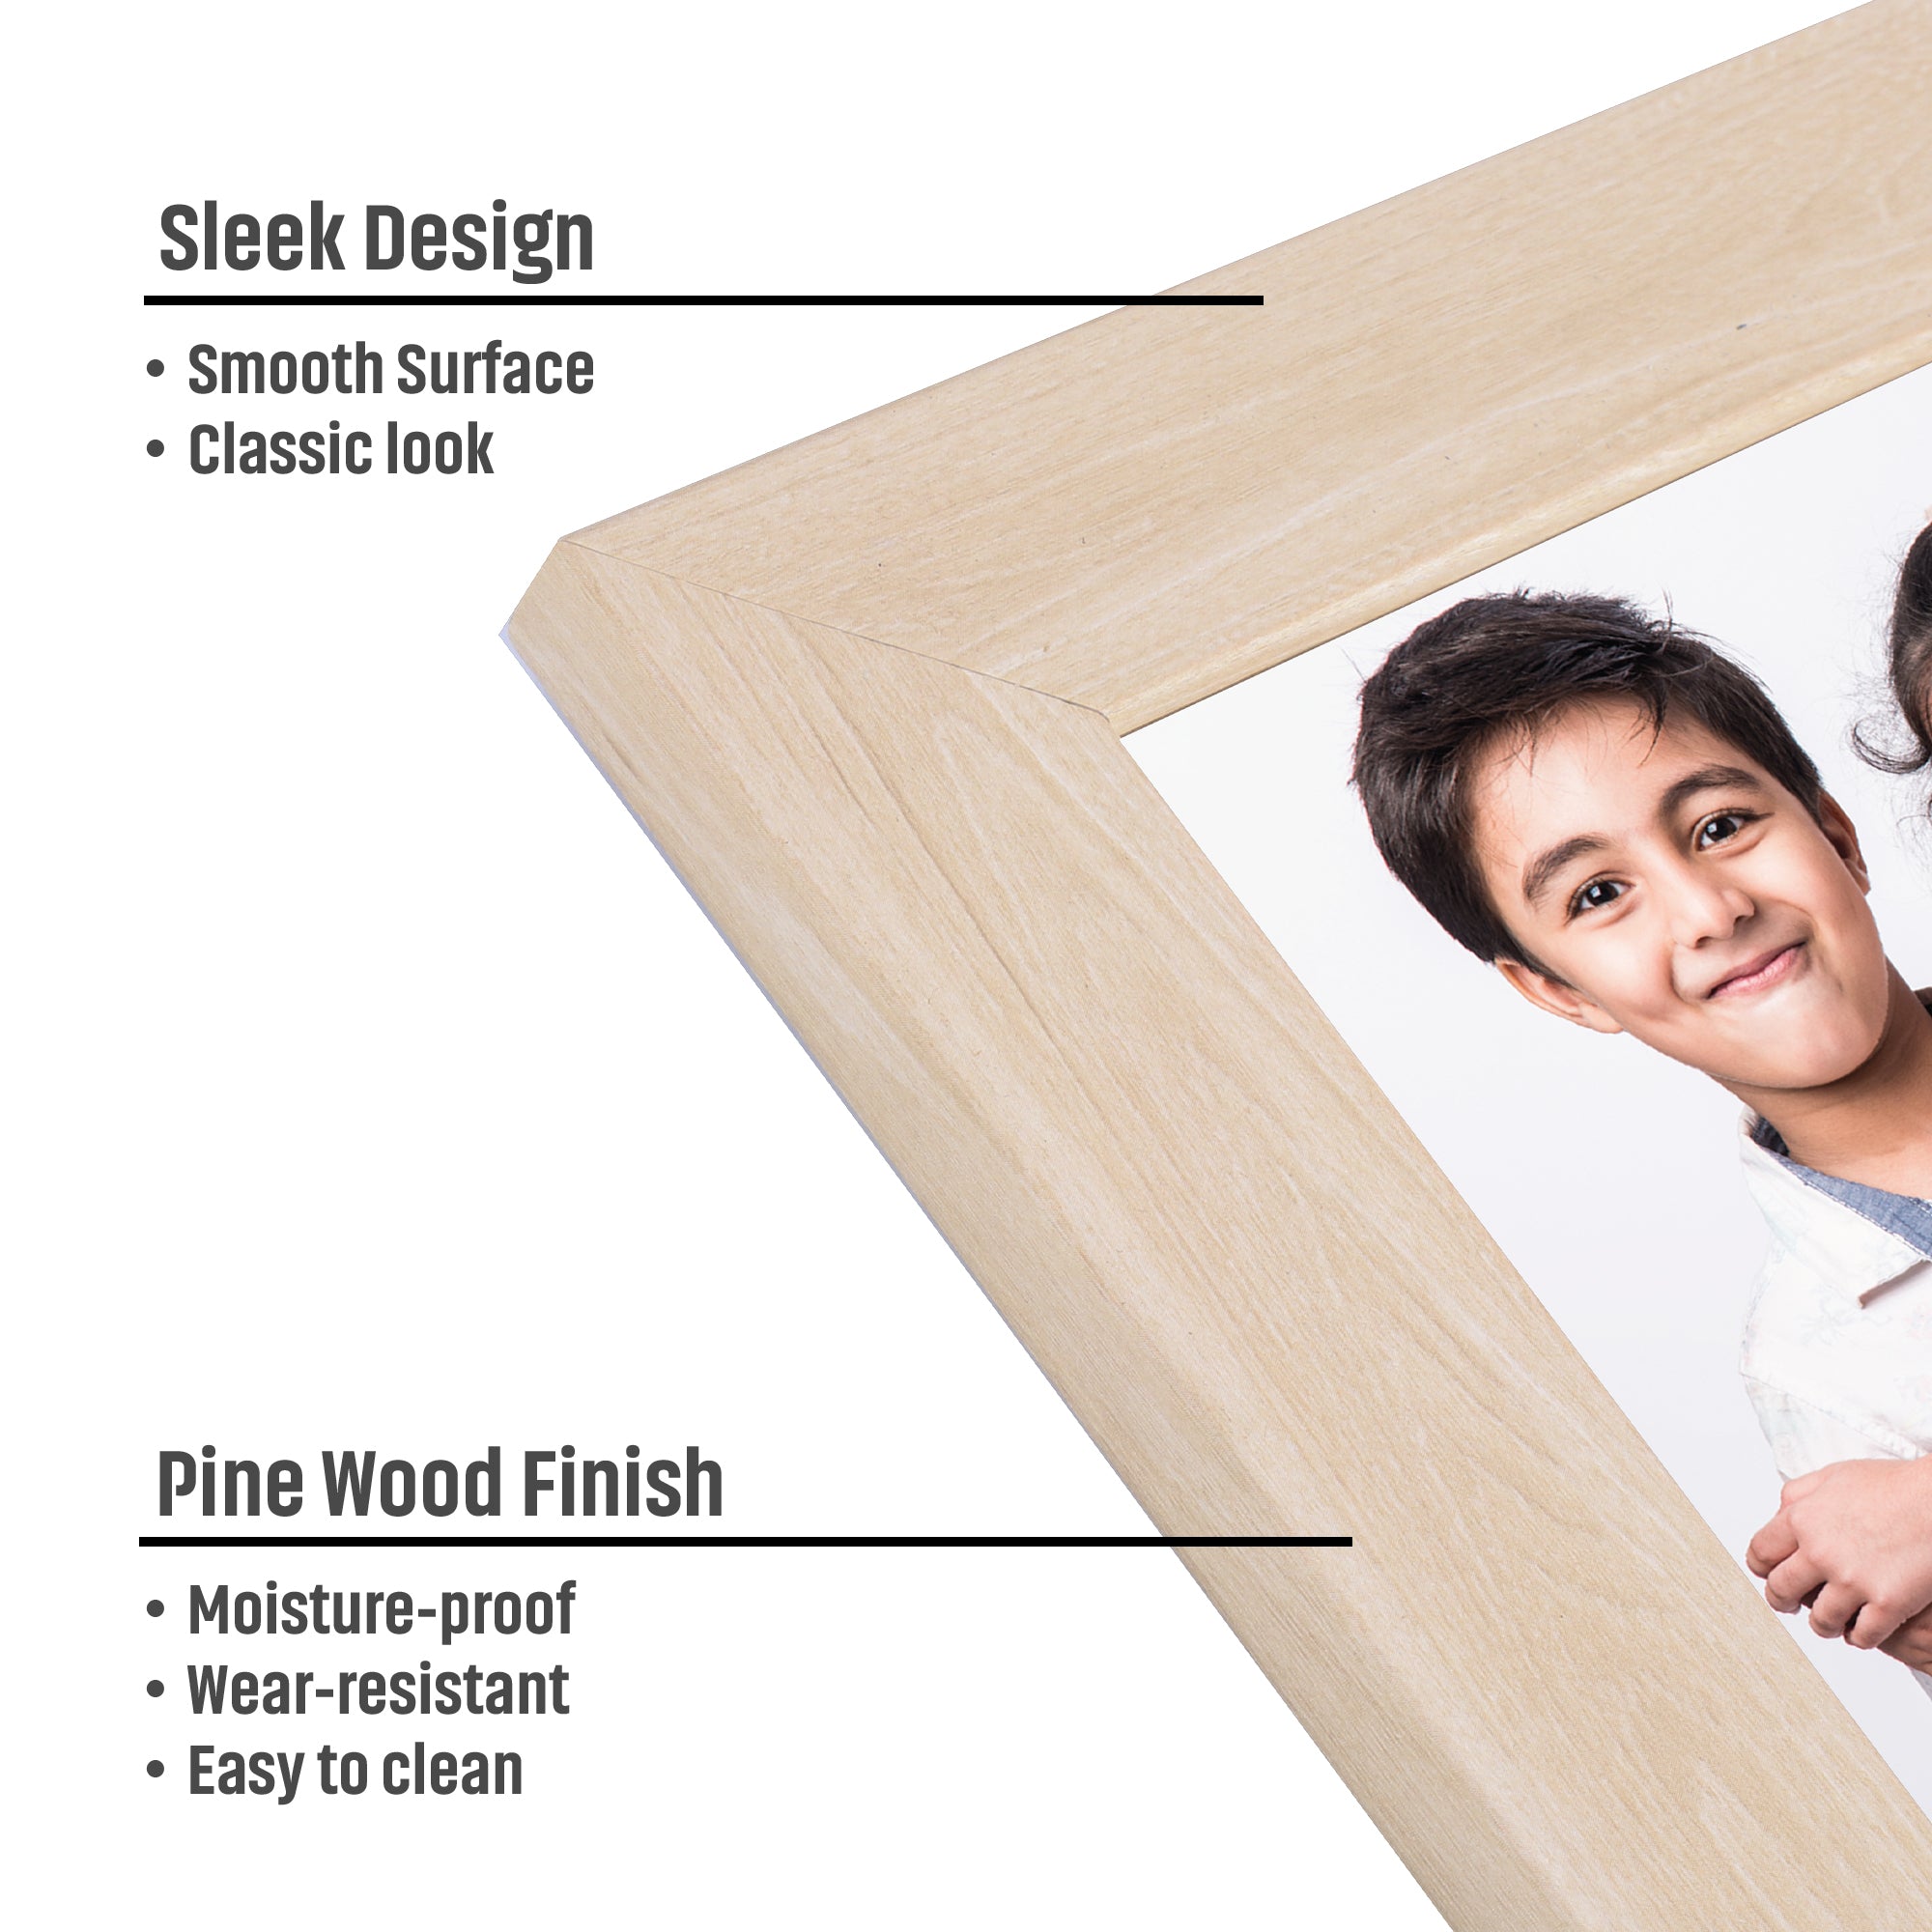 Table Top Photo Frame Pine 5 X 7Inch 1Pc Sw Lb